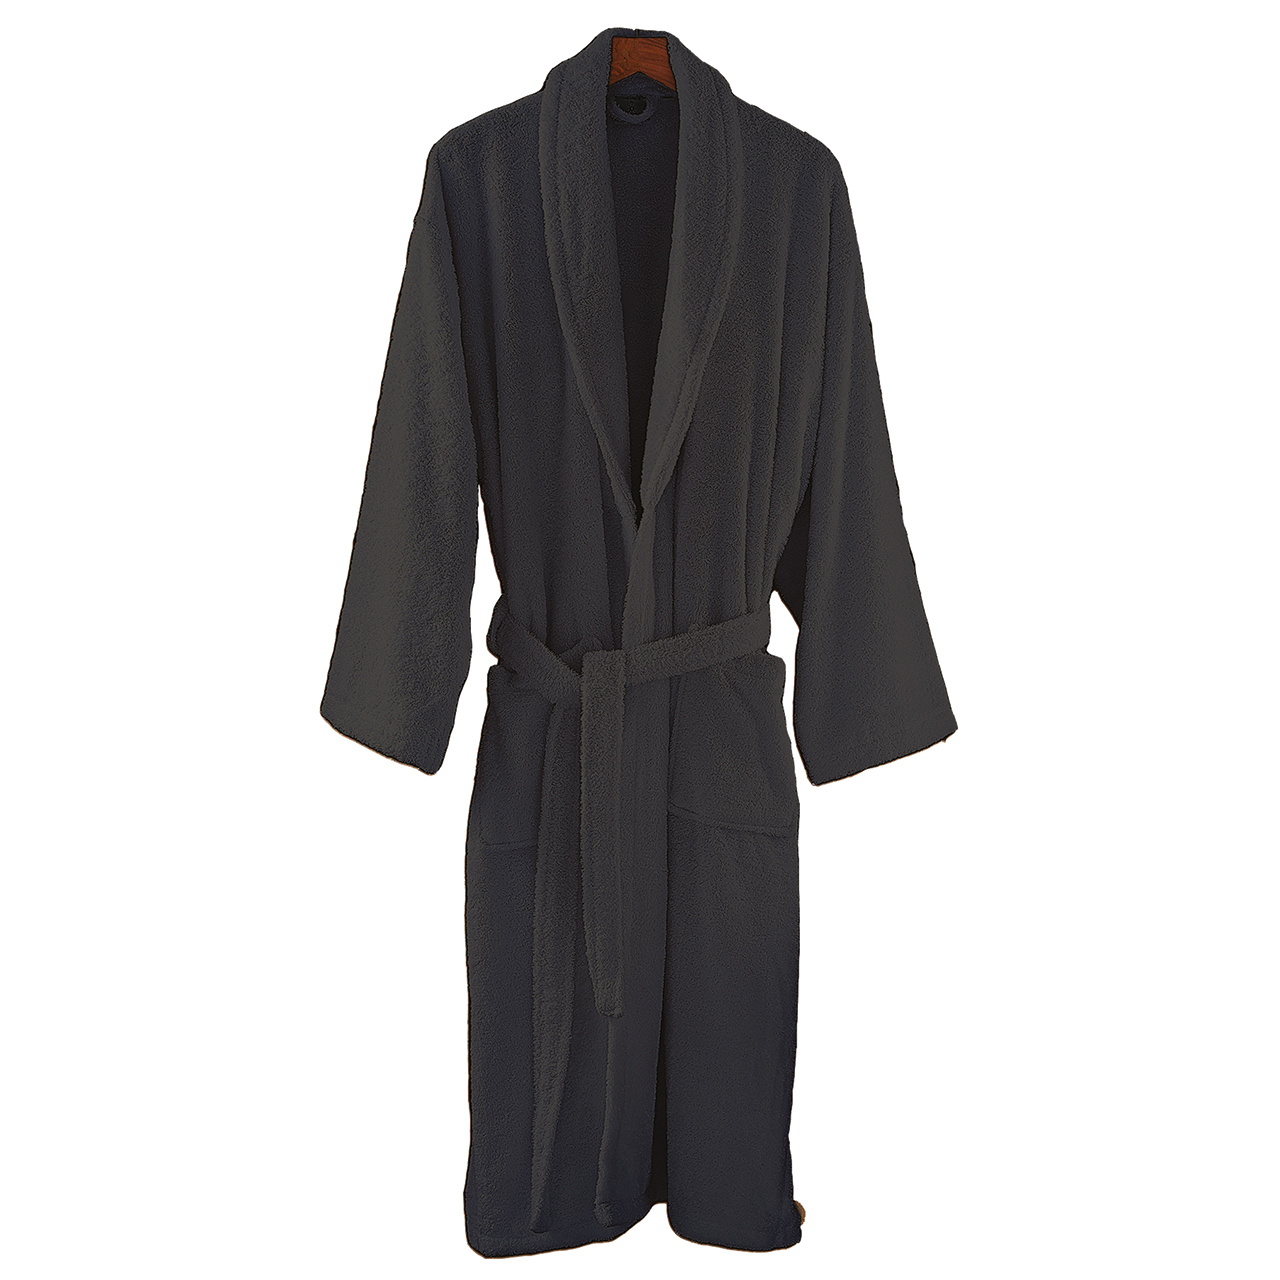 Terry Towelling Robe